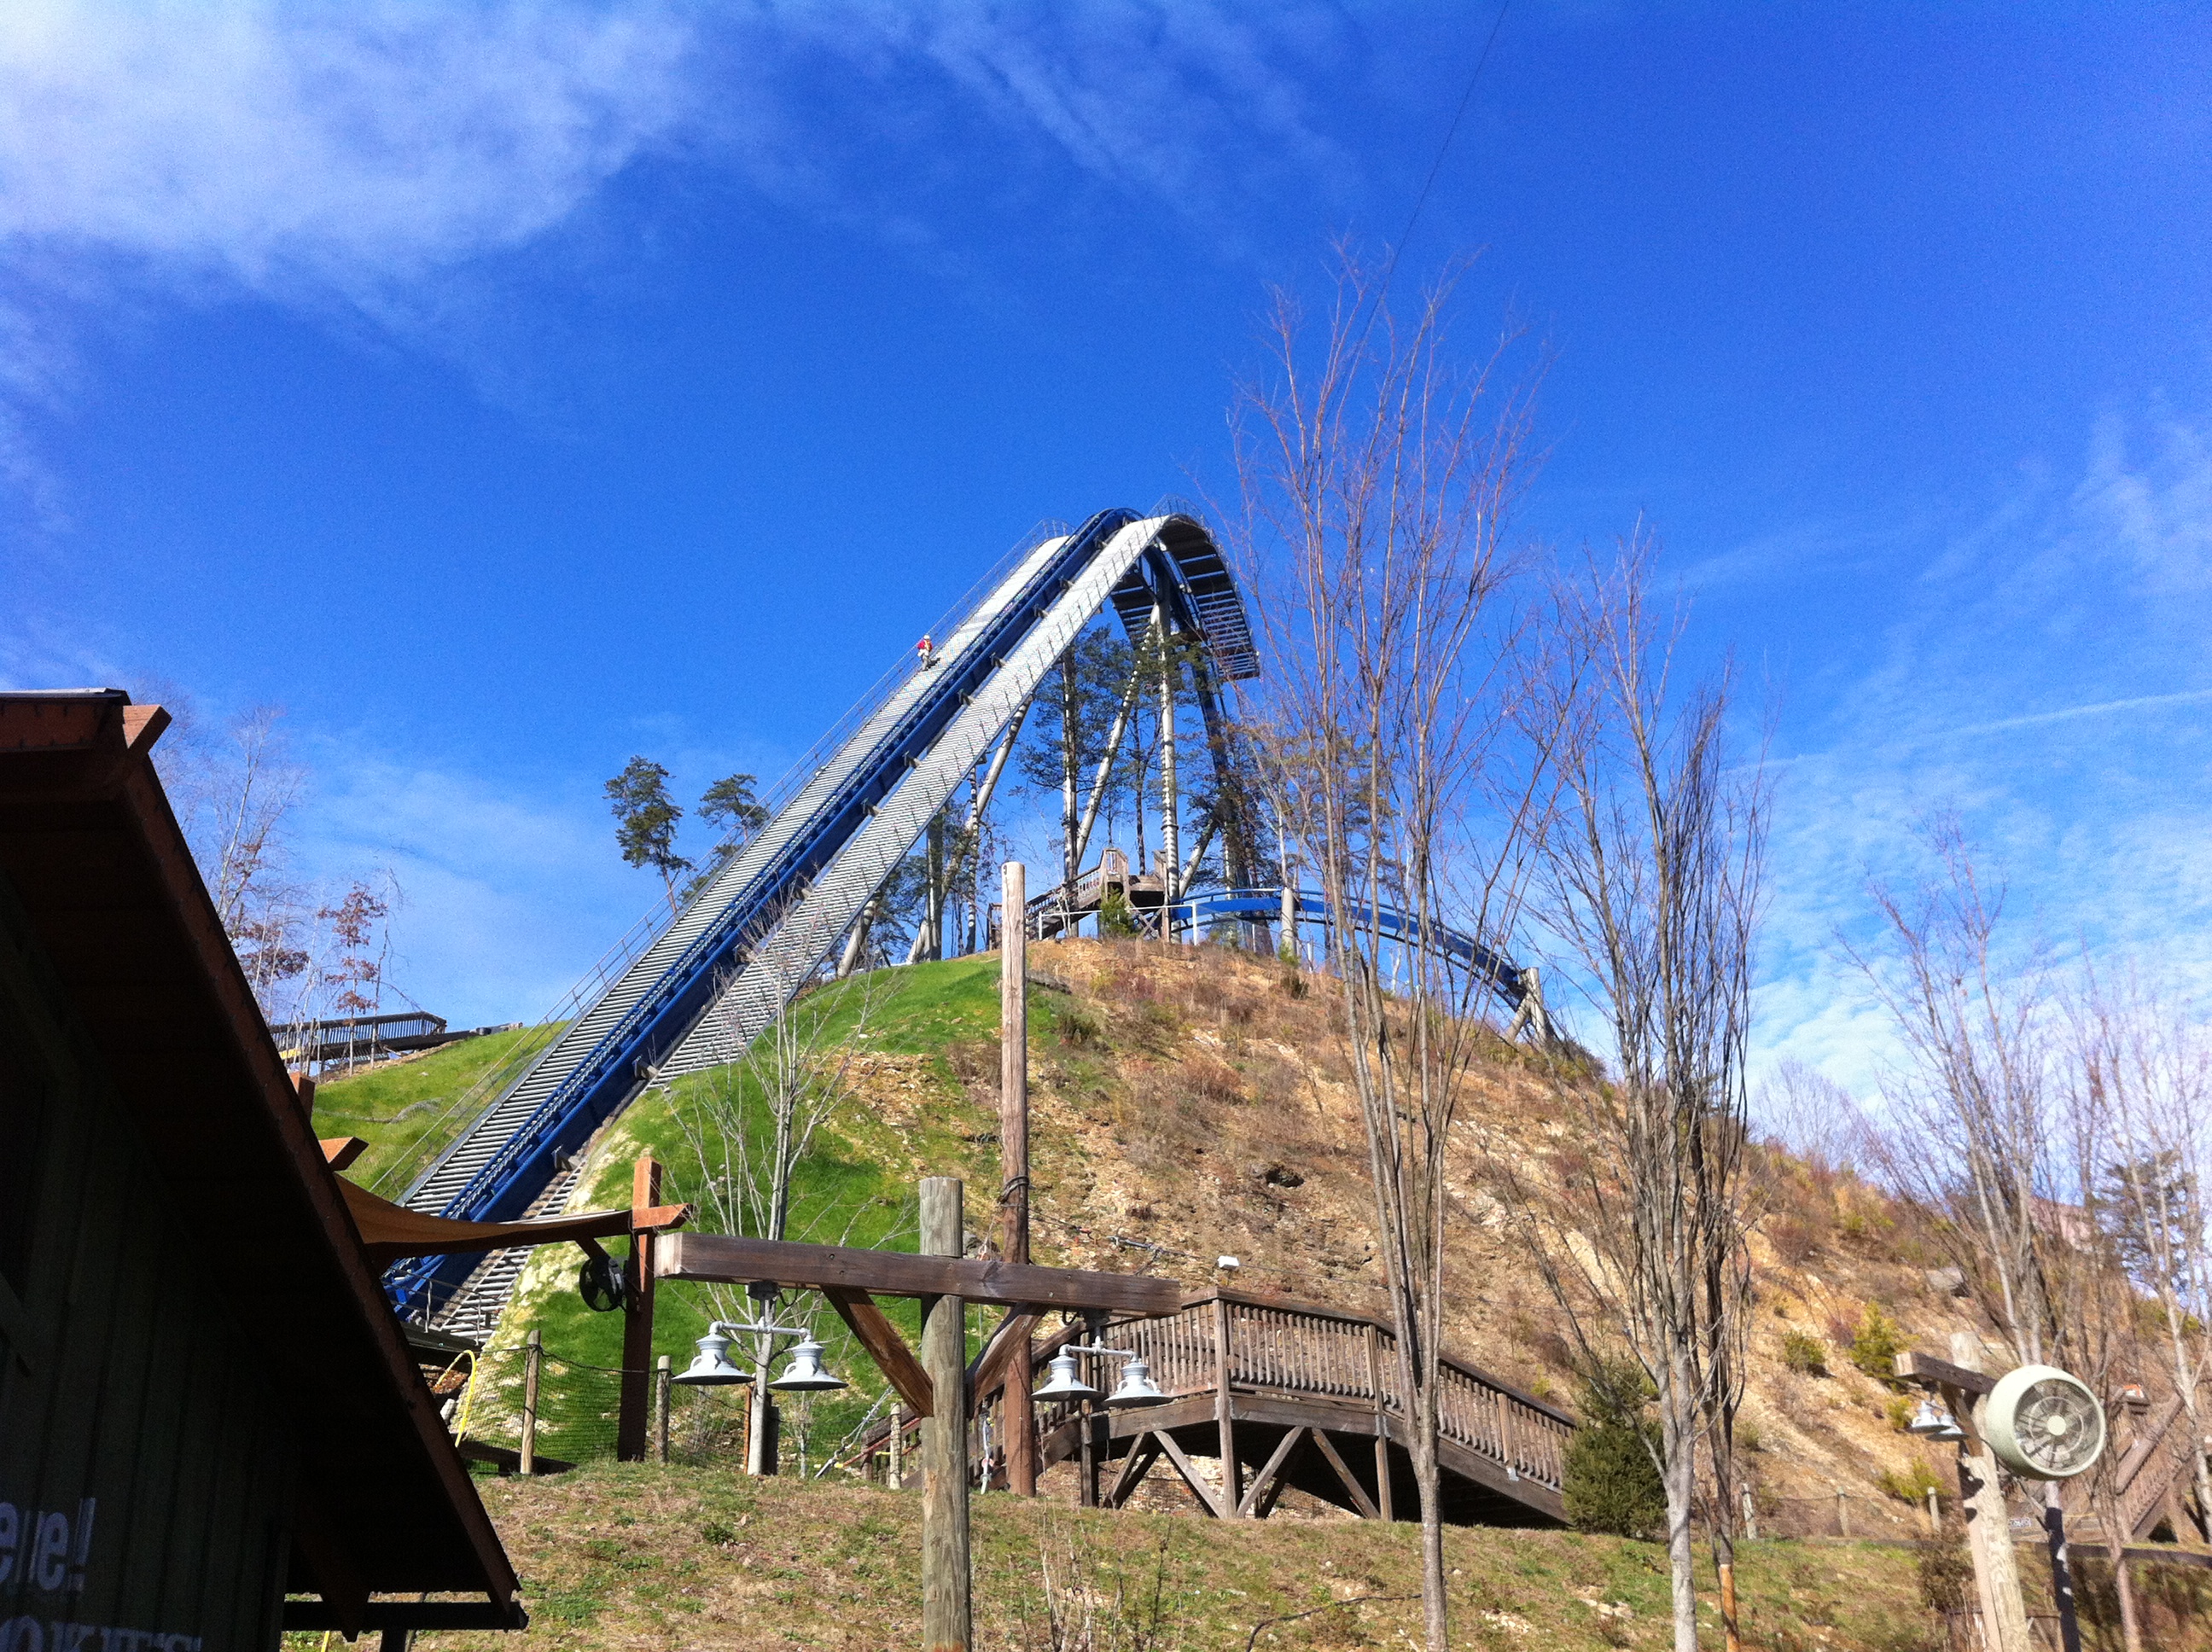 Theme Park Review • Dollywood Discussion Thread - Page 246